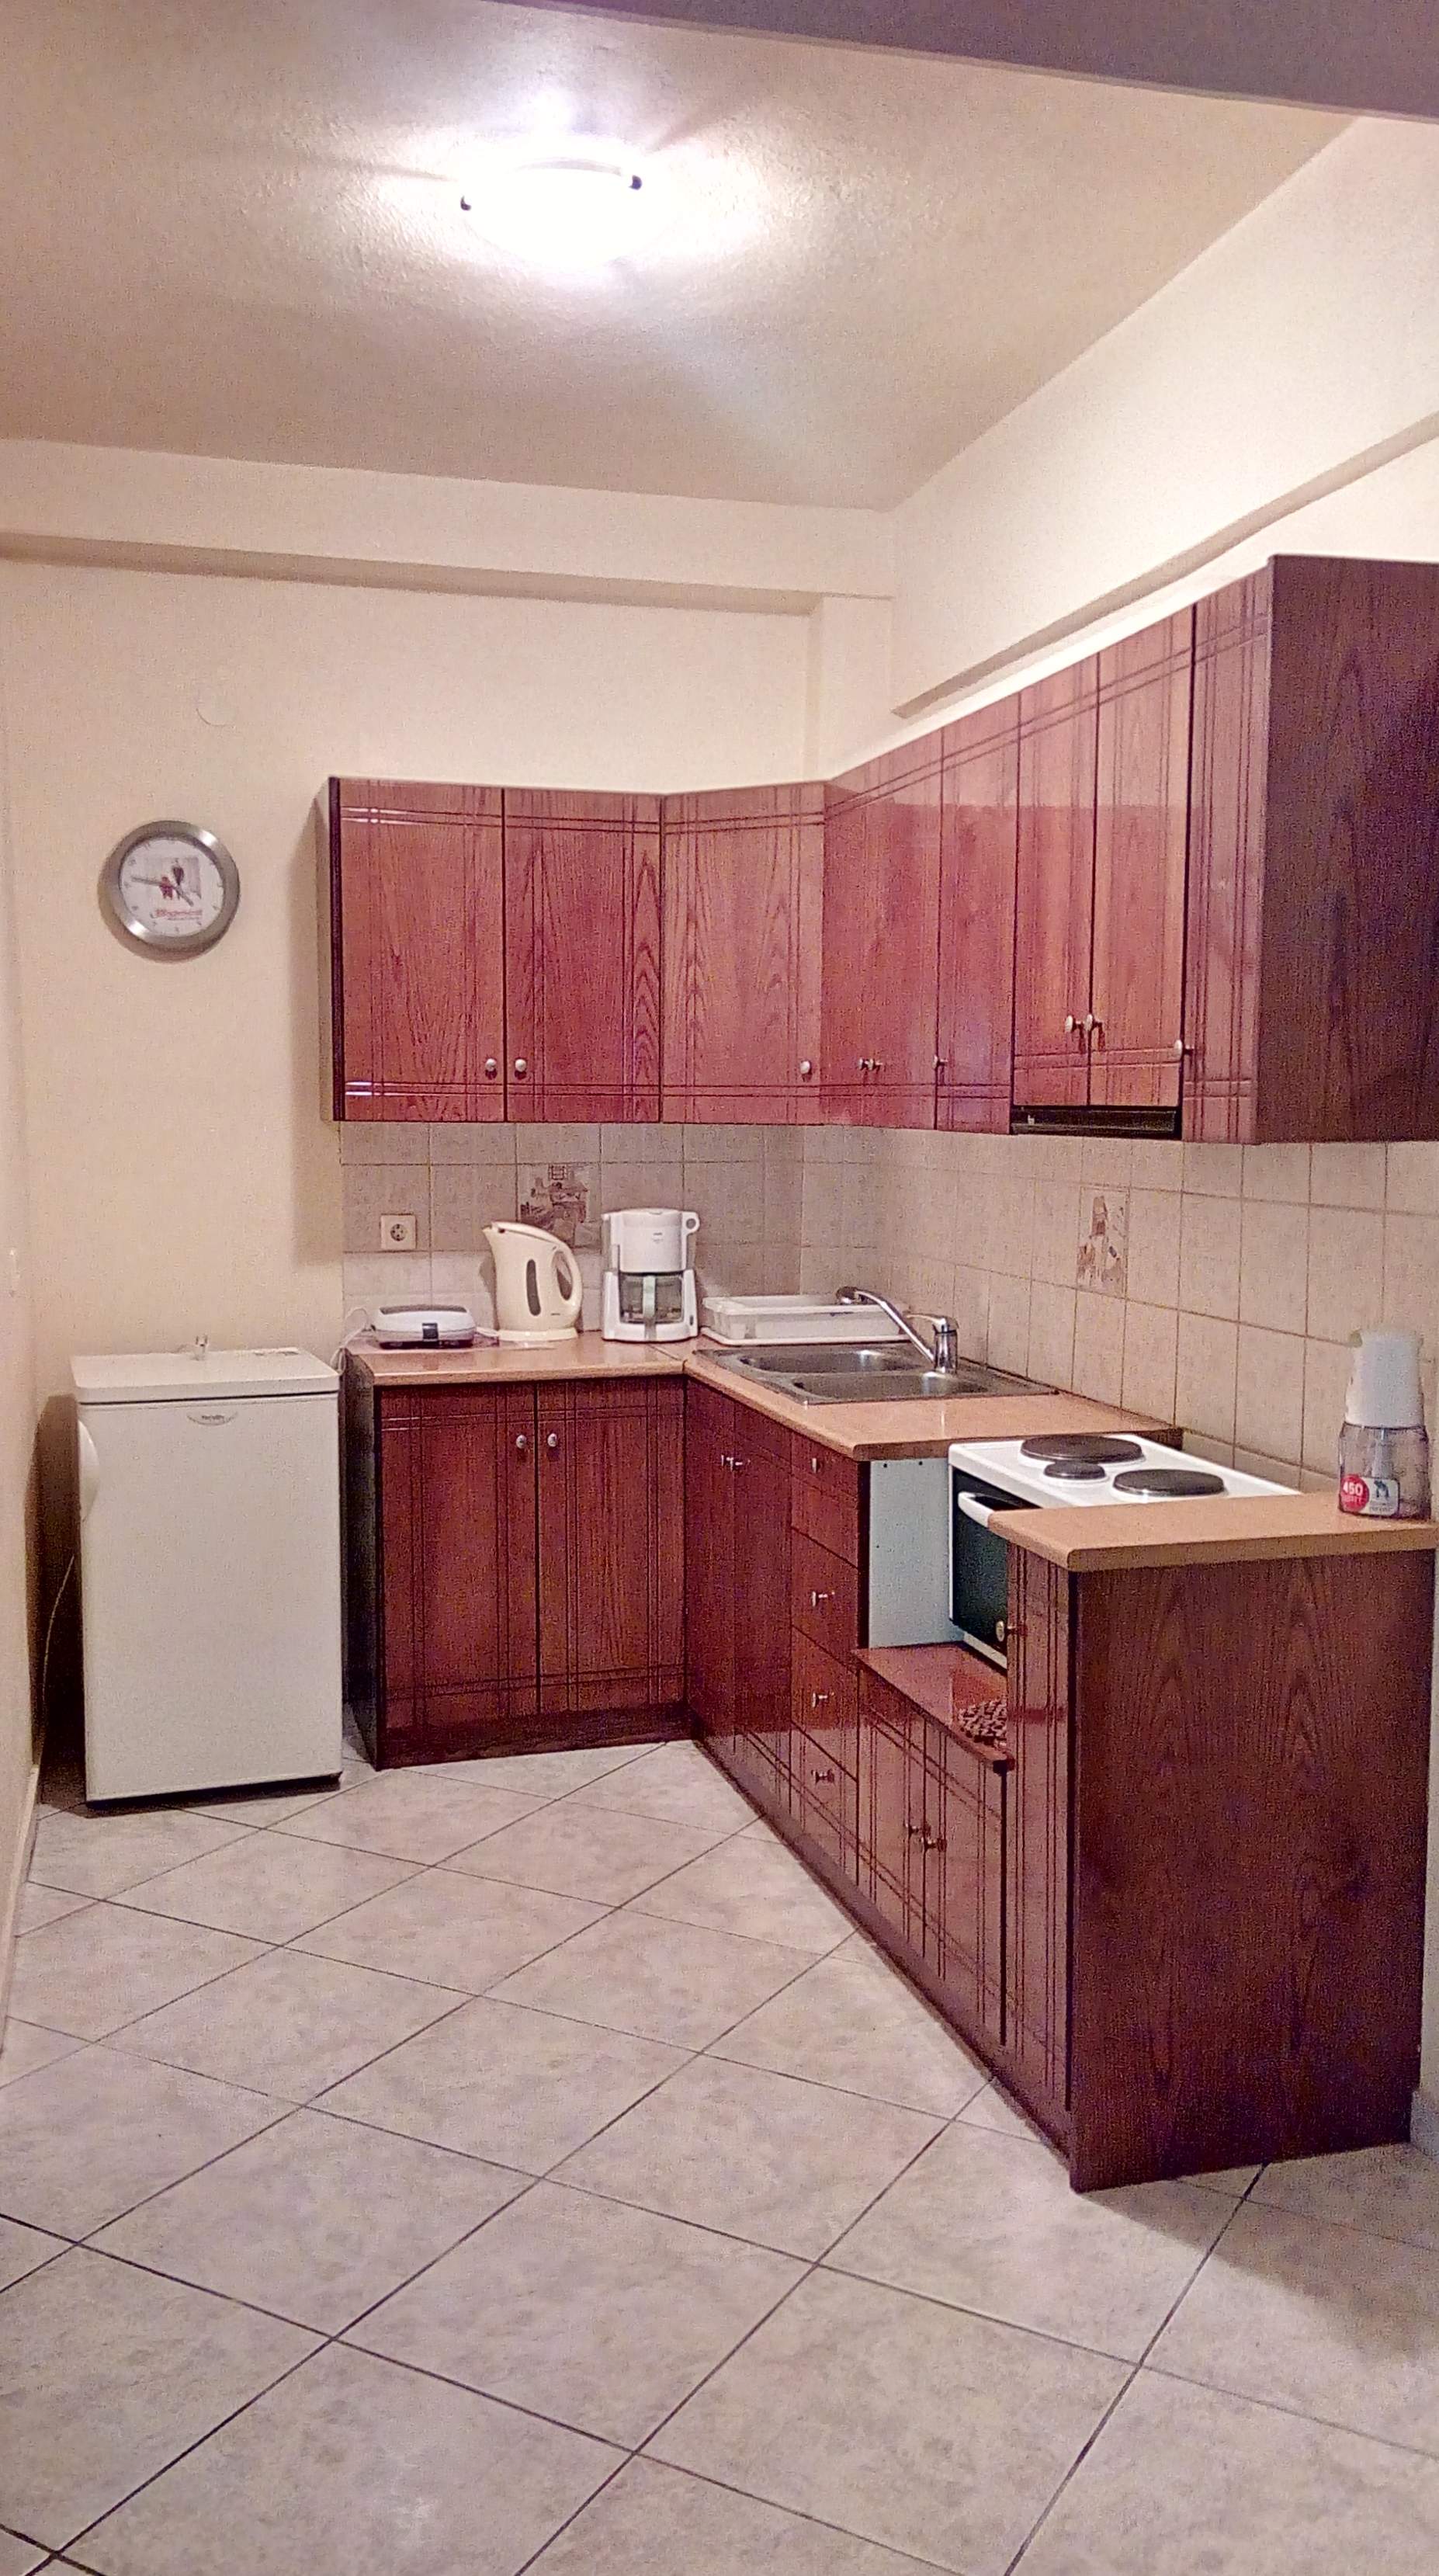 Elias apartment with fully equipped kitchen